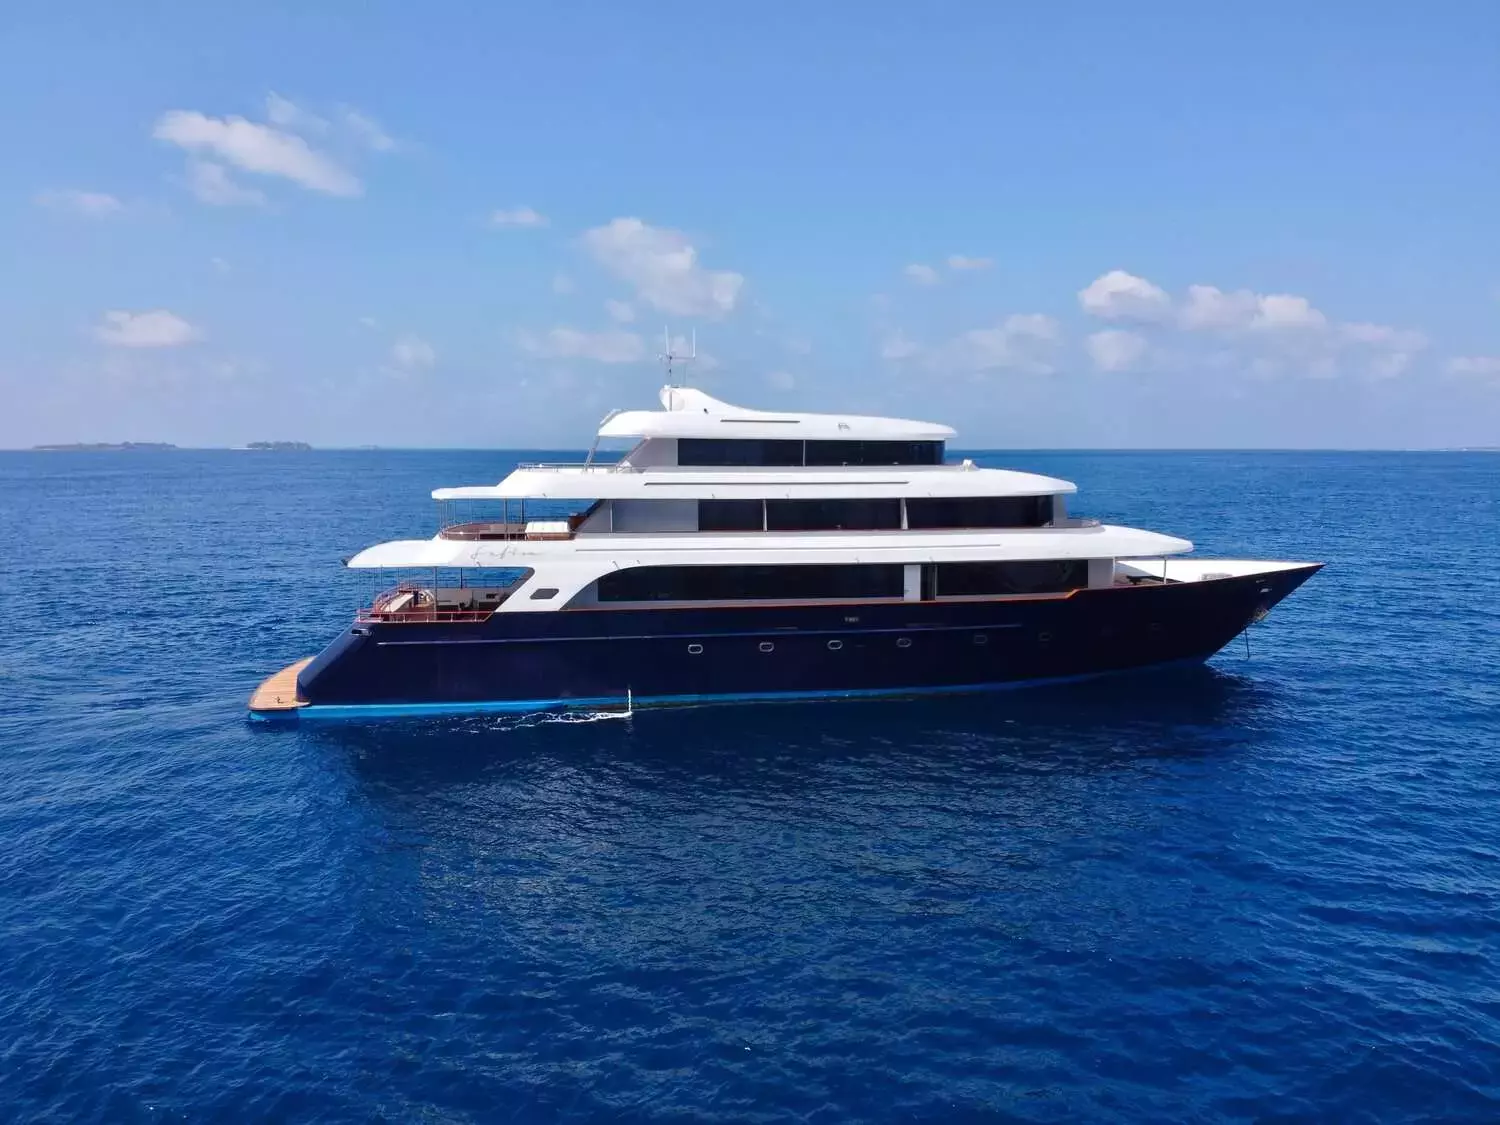 Safira by Custom Made - Top rates for a Charter of a private Superyacht in Seychelles